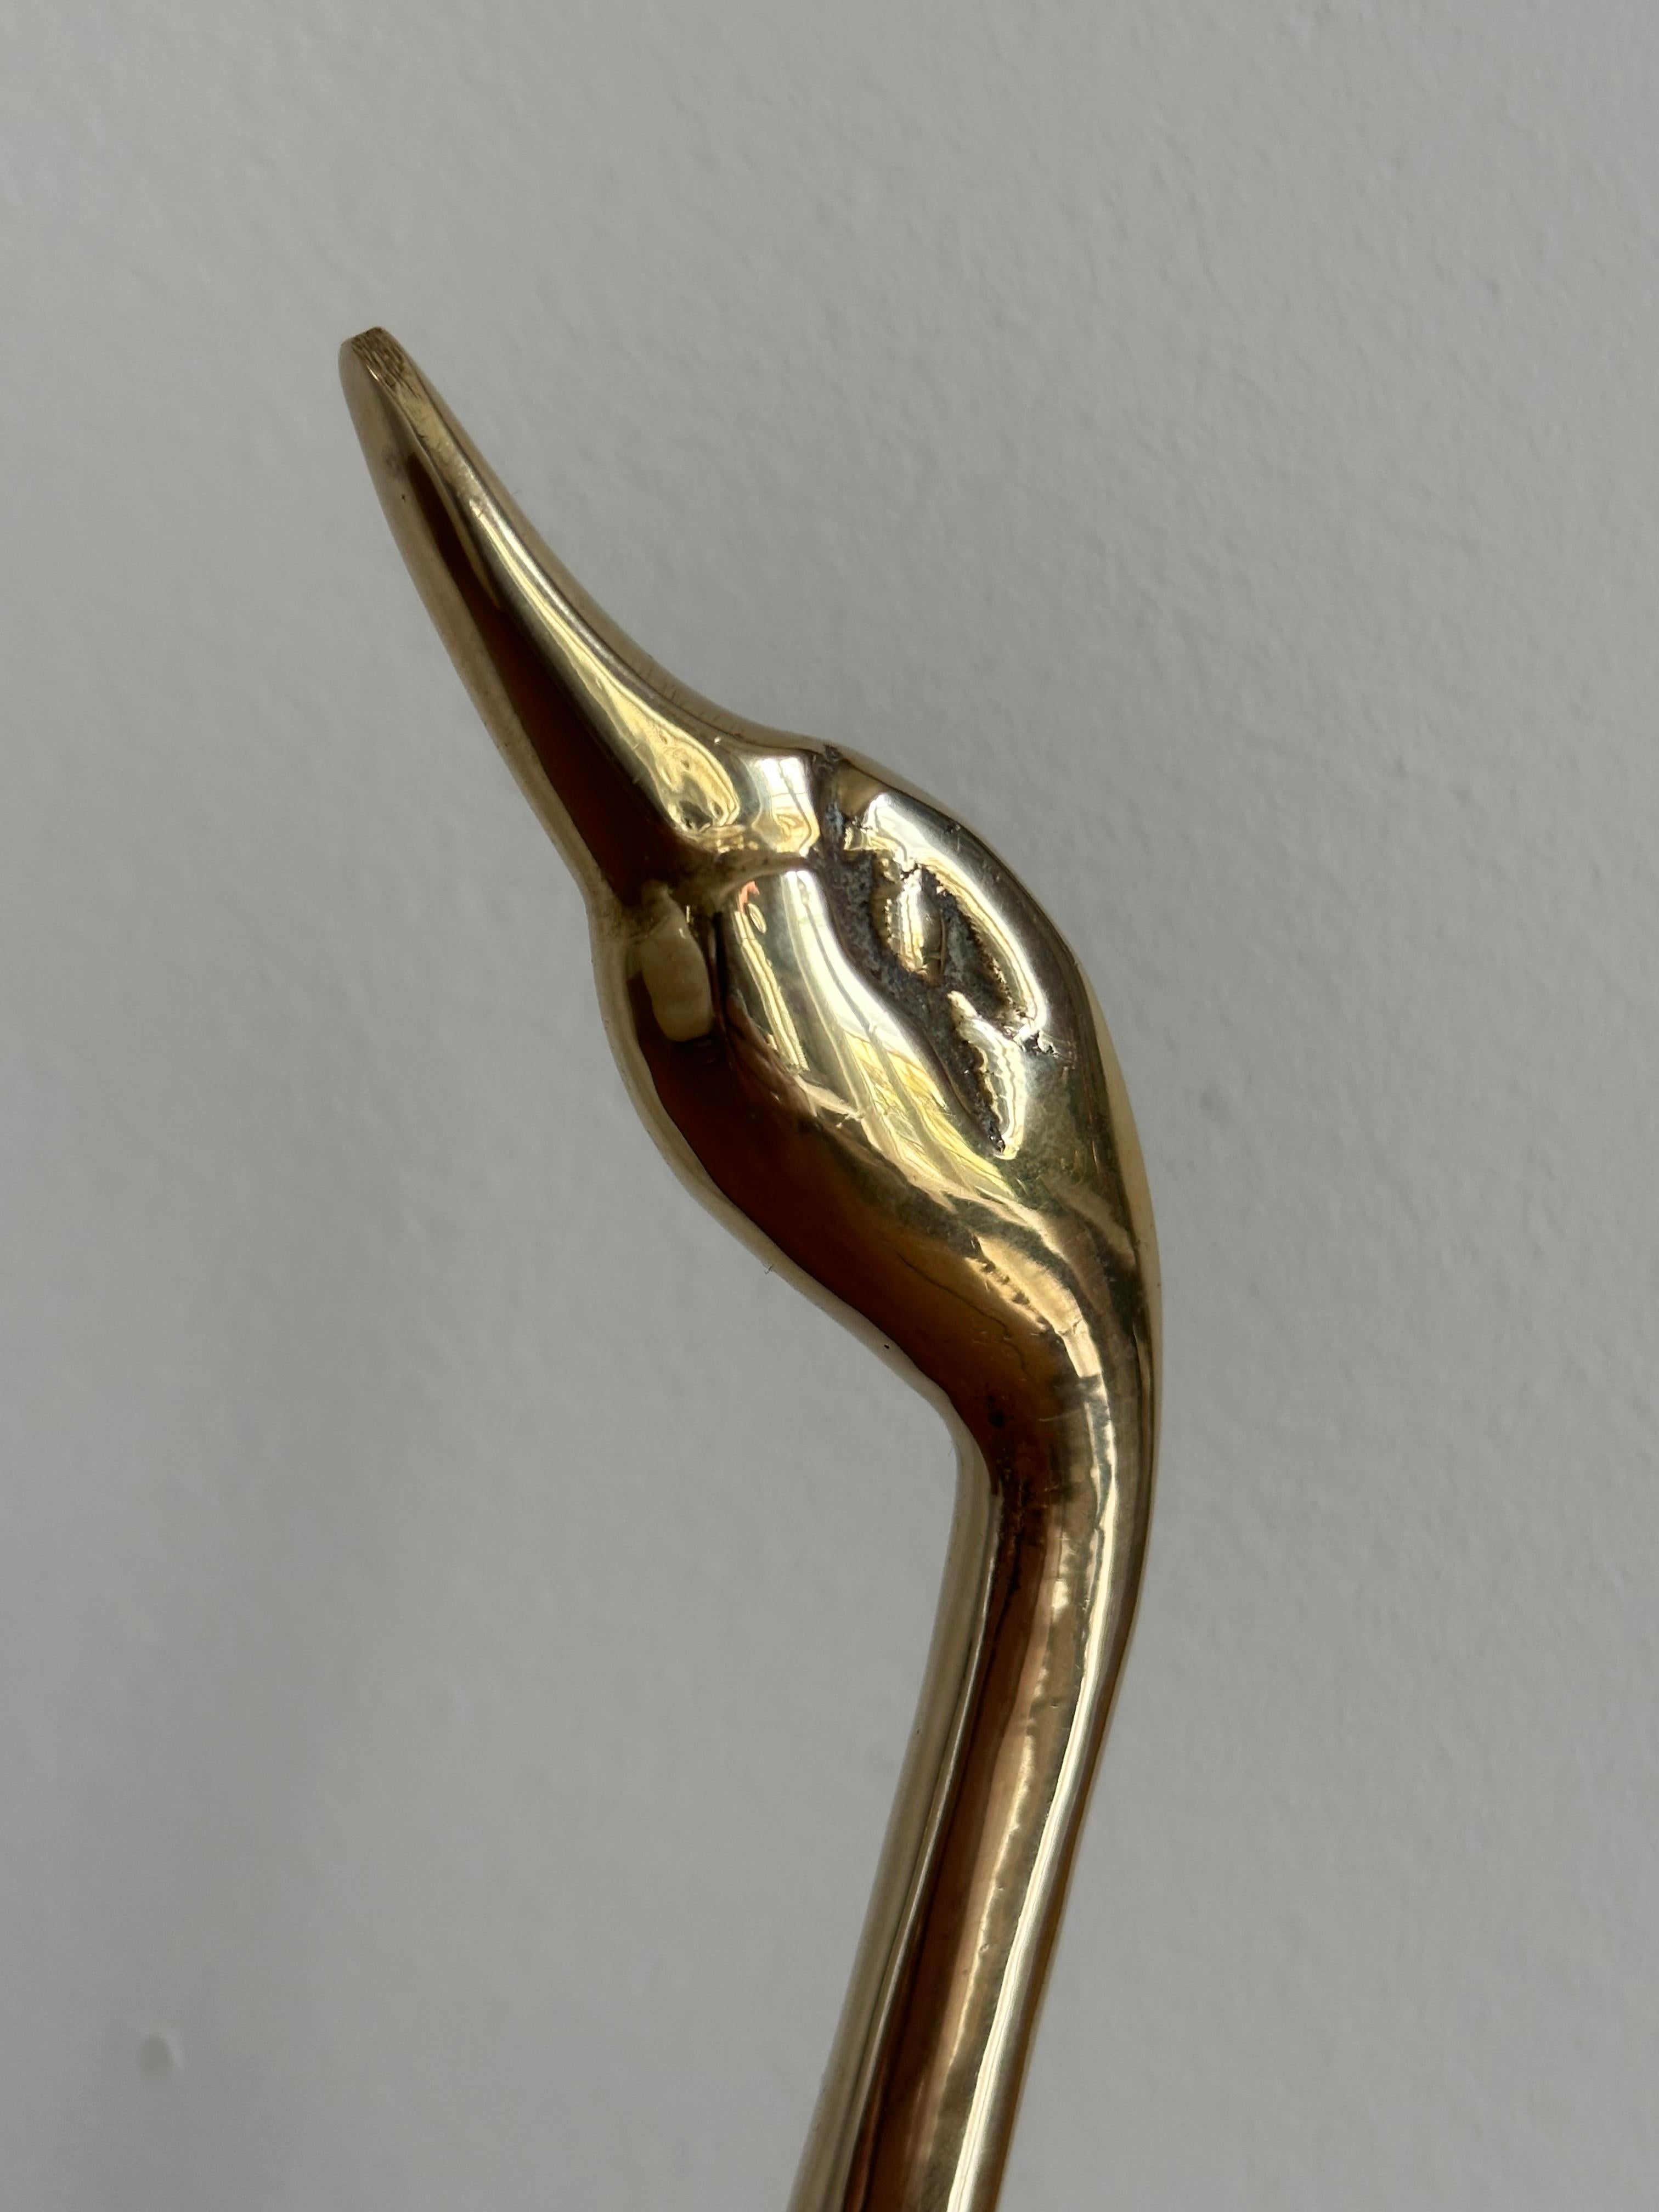 Vintage 1970s French Polished Brass Elegant Decorative Swan Paperweight 7